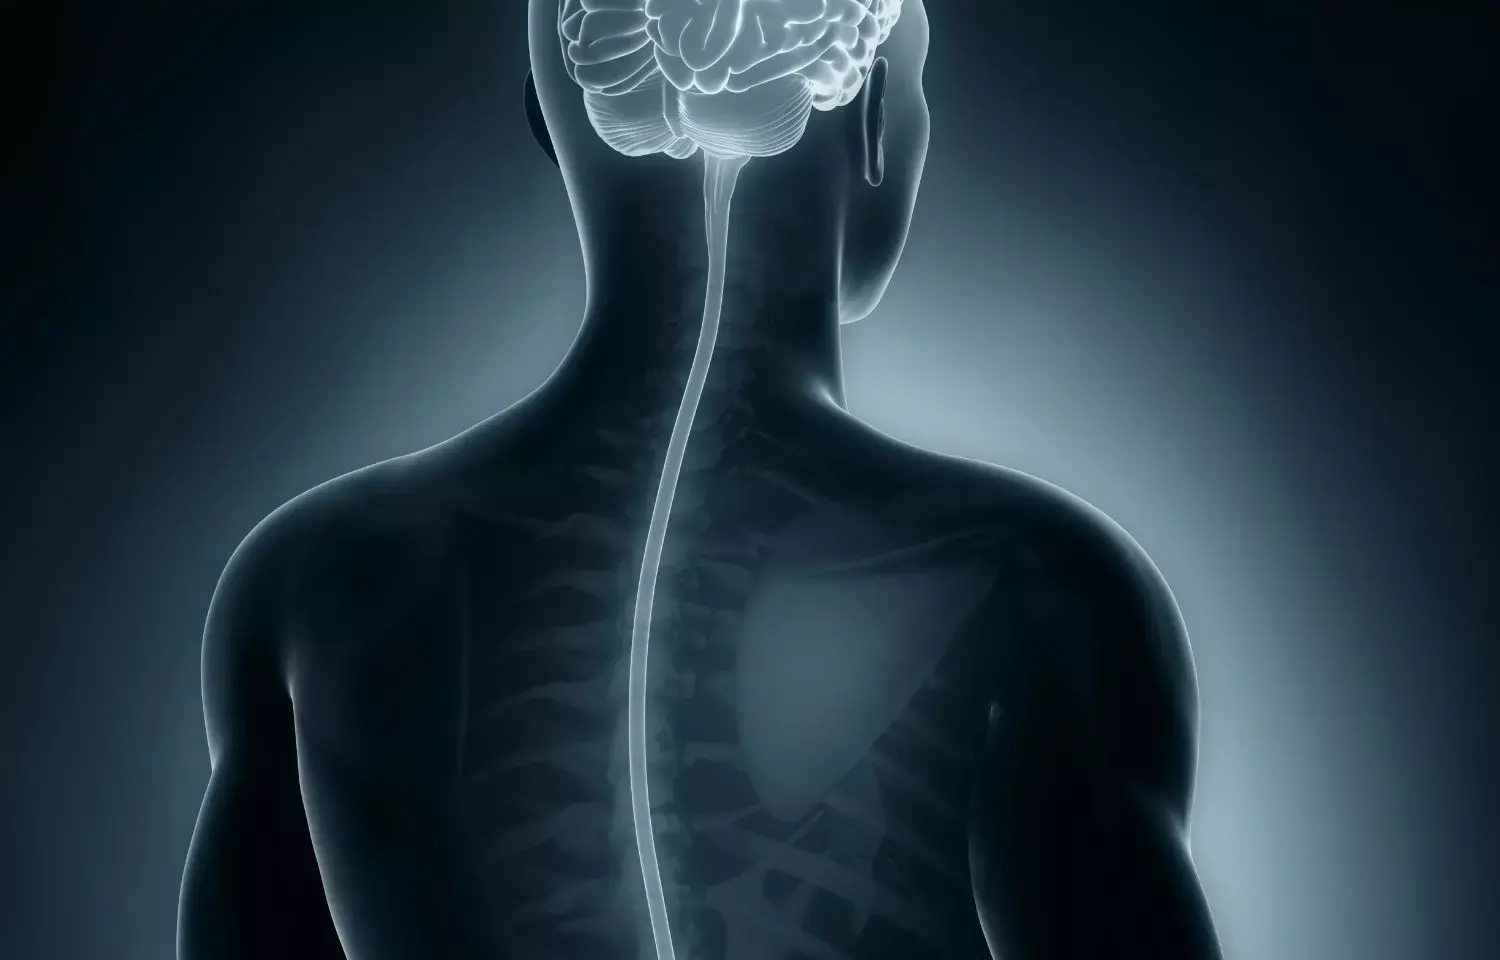 FDA approves spinal cord stimulation system for treatment of chronic pain